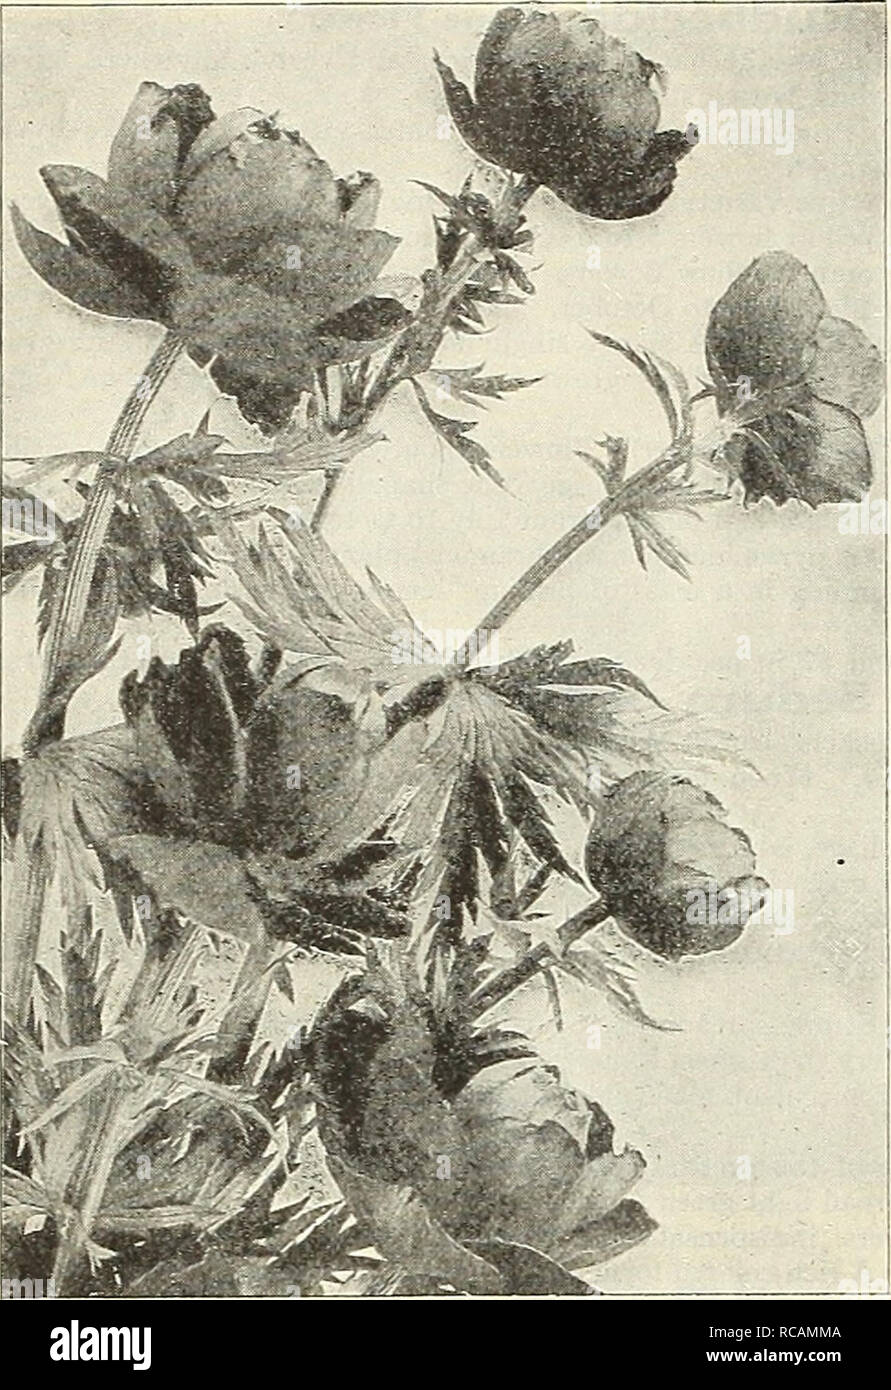 . Dreer's autumn catalogue 1930. Bulbs (Plants) Catalogs; Flowers Seeds Catalogs; Gardening Equipment and supplies Catalogs; Nurseries (Horticulture) Catalogs; Vegetables Seeds Catalogs. 42 /flllA^iaMhi!iJaii5ll!rMil!JM.^ii^PHILMm. Trollius (Globe Flower) Saponaria (Soap wort) Ocymoides Splendens. A very useful plant for the rockerj' or the border, producing from Maj' to August masses of attractive small bright rose flowers; 8 inches. 25 cts. each; S2.50 per doz.; $18.00 per 100. Silene (Catchfly) Alpestris. A good rock work plant, grows about 4 inches high with glistening white flowers in Jul Stock Photo